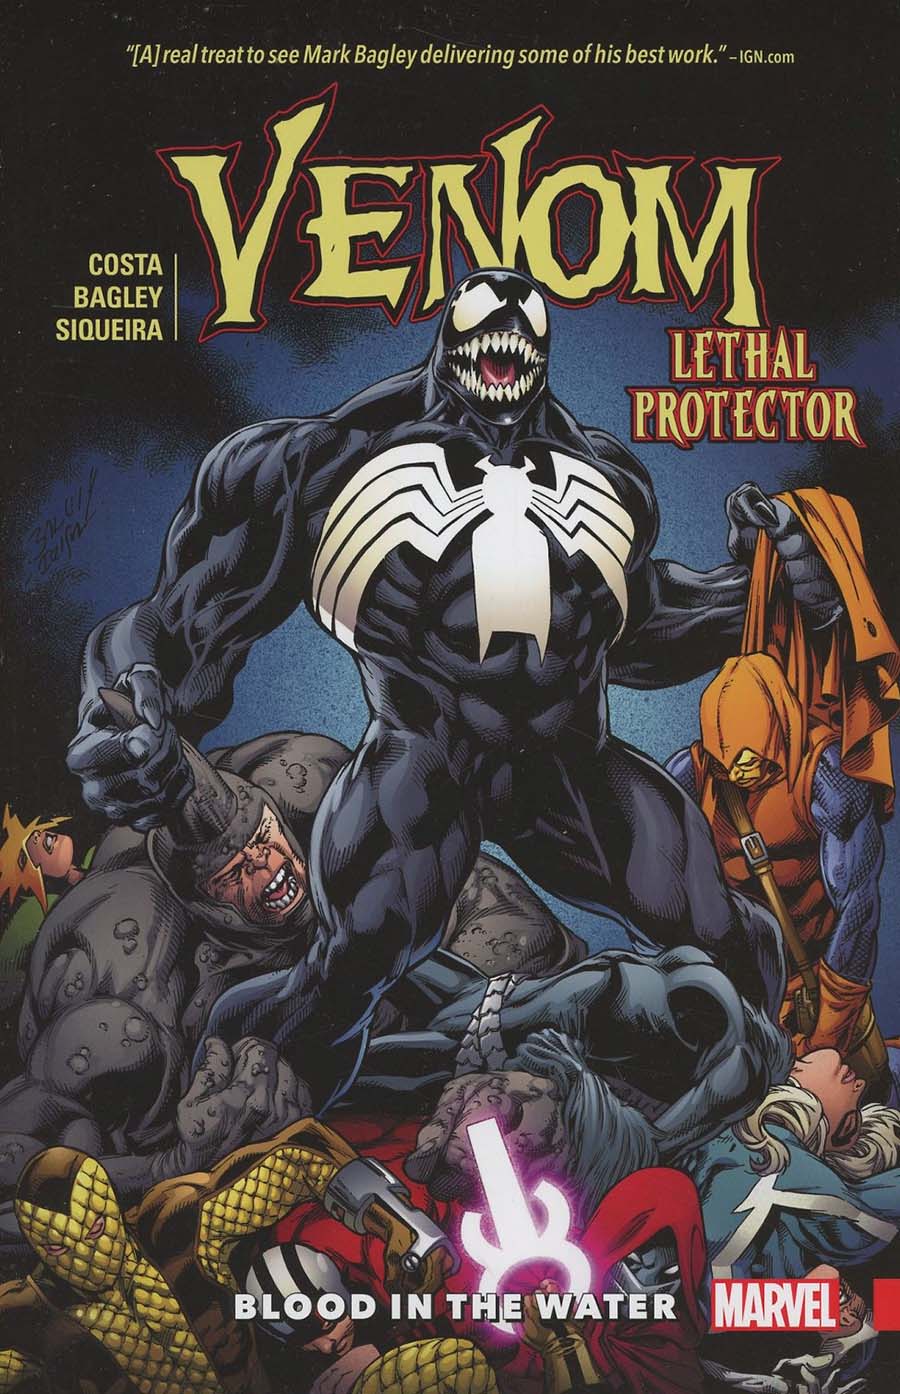 Venom (2016) Vol 3 Lethal Protector Blood In The Water TP